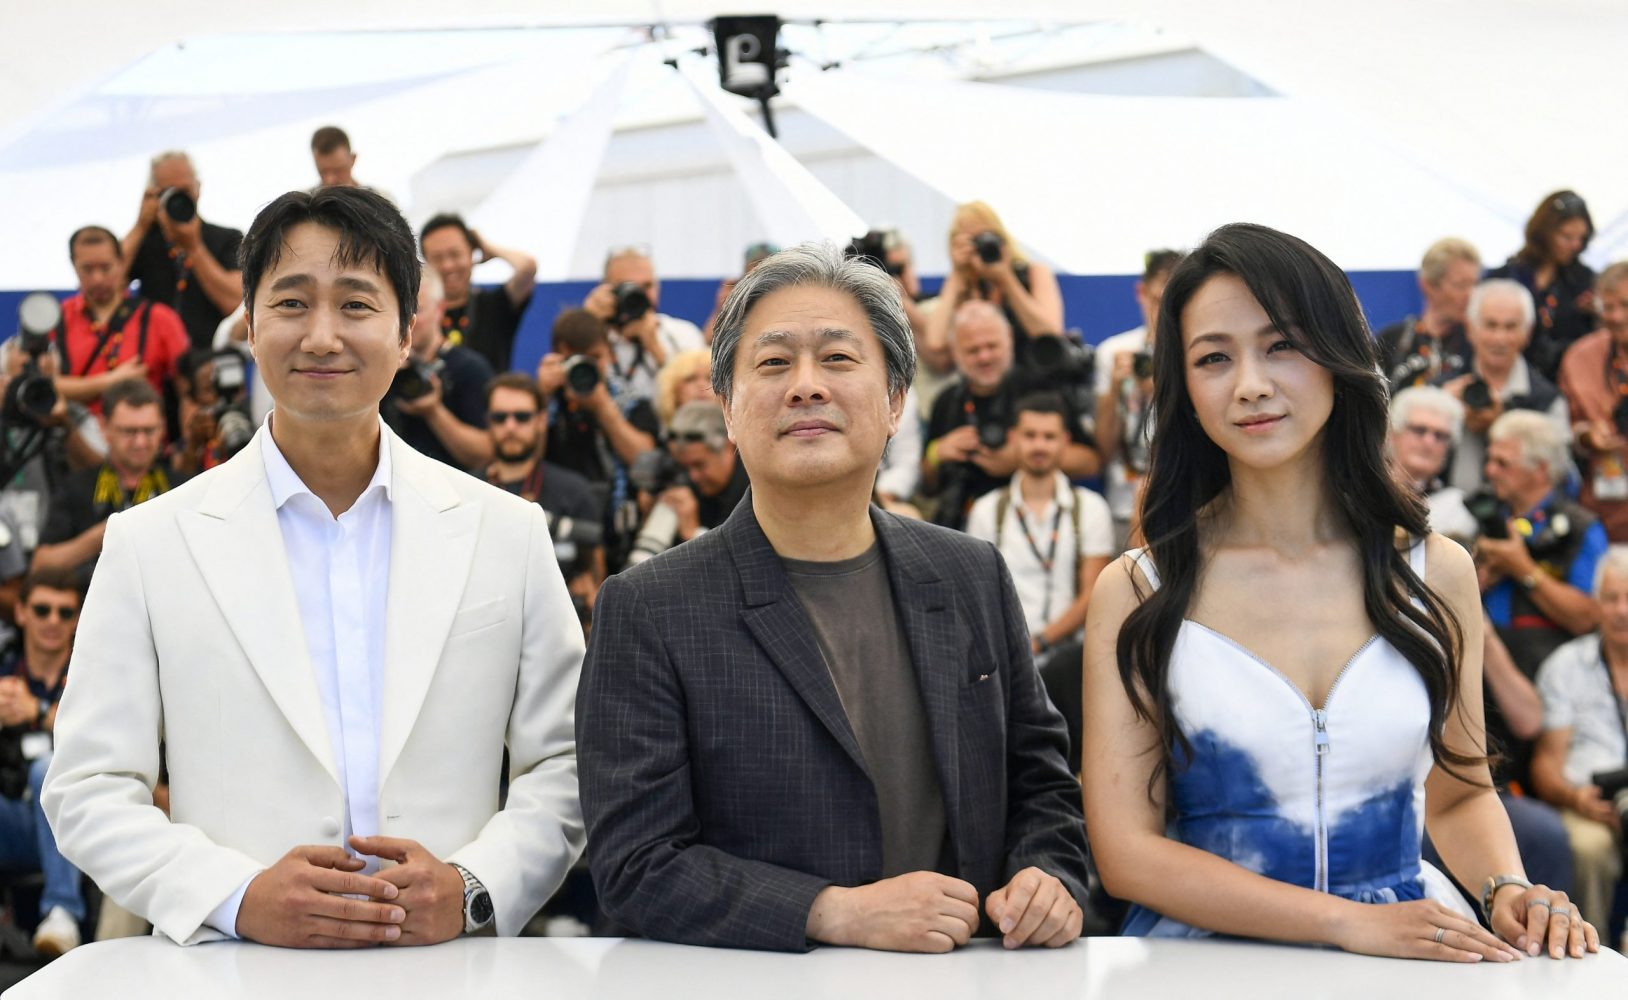 Decision to Leave tỏa sáng tại Cannes 2022